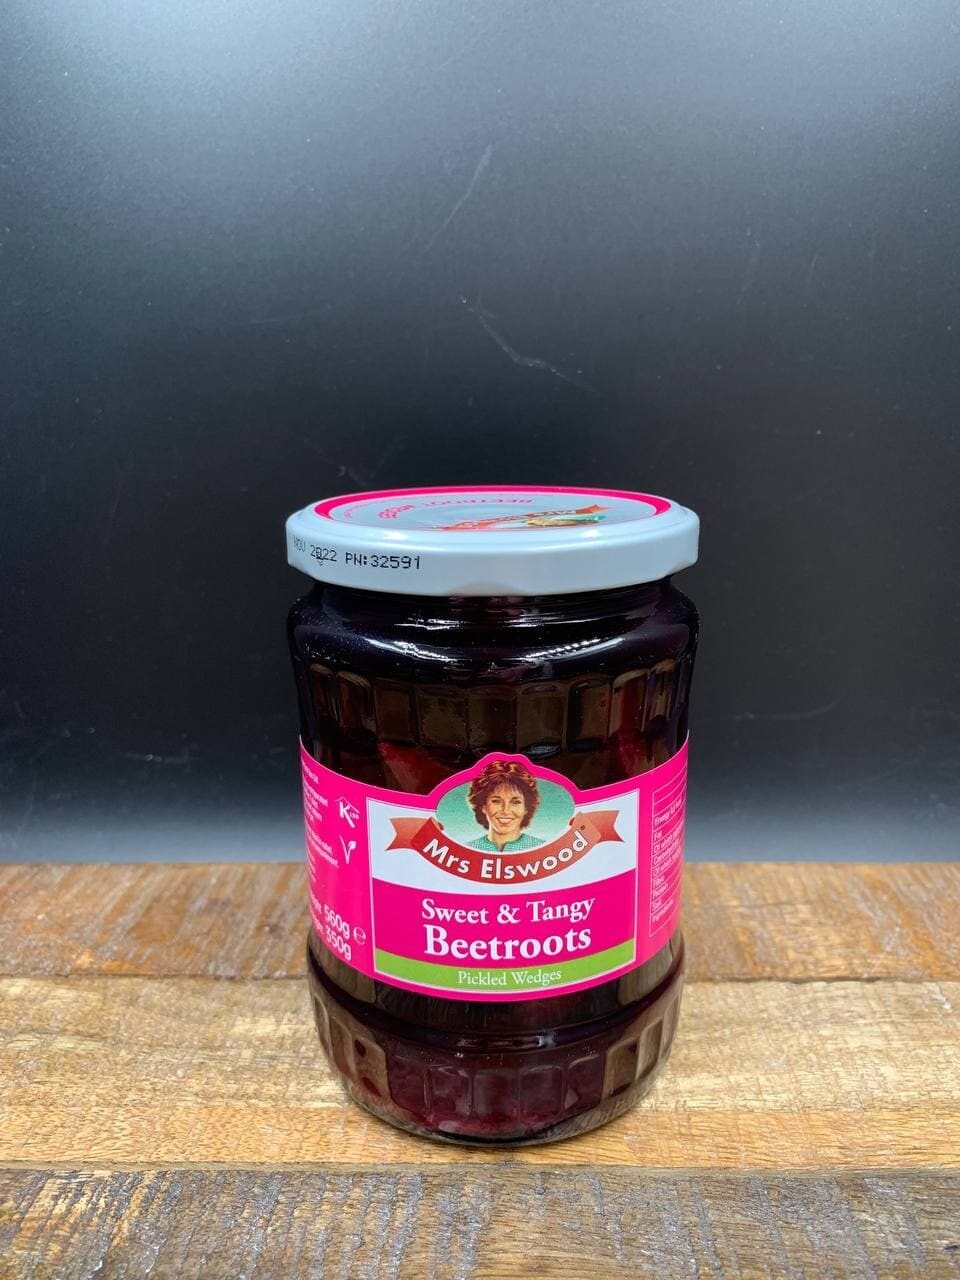 Mrs Elswood Sweet & Tangy Beetroot Pickled Wedges 560g